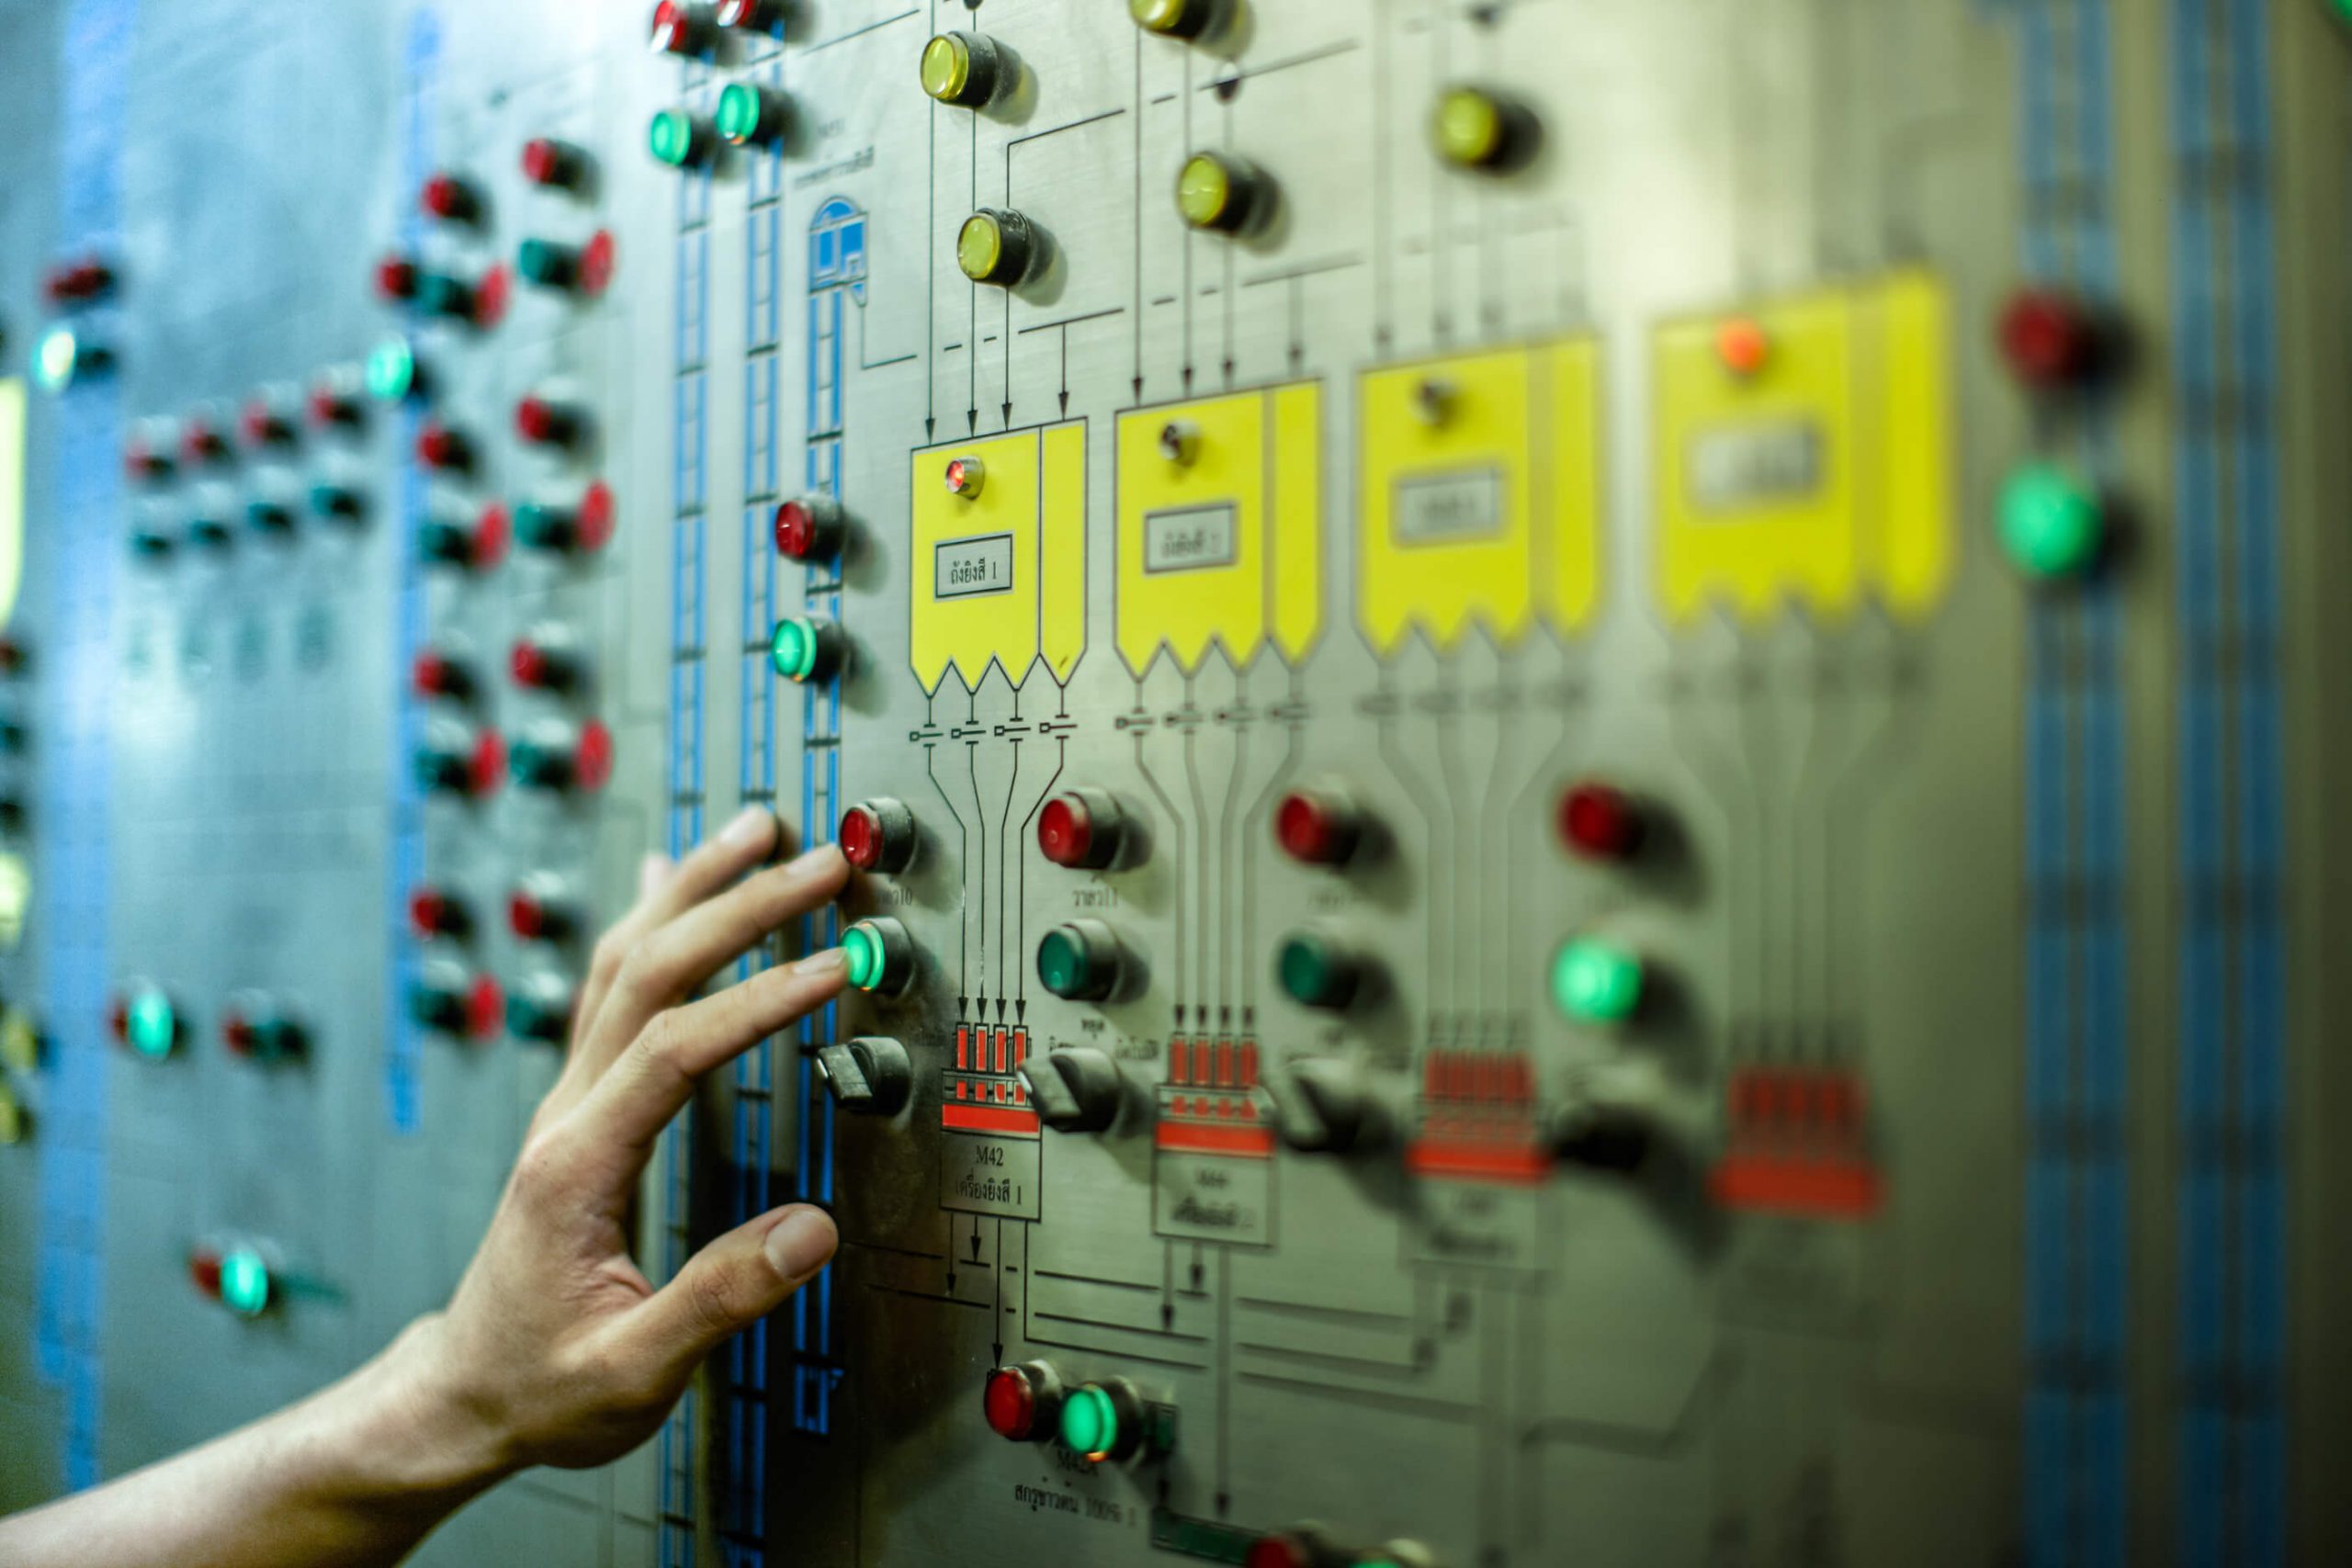 SCADA vs IoT: the role of SCADA systems in Industry 4.0